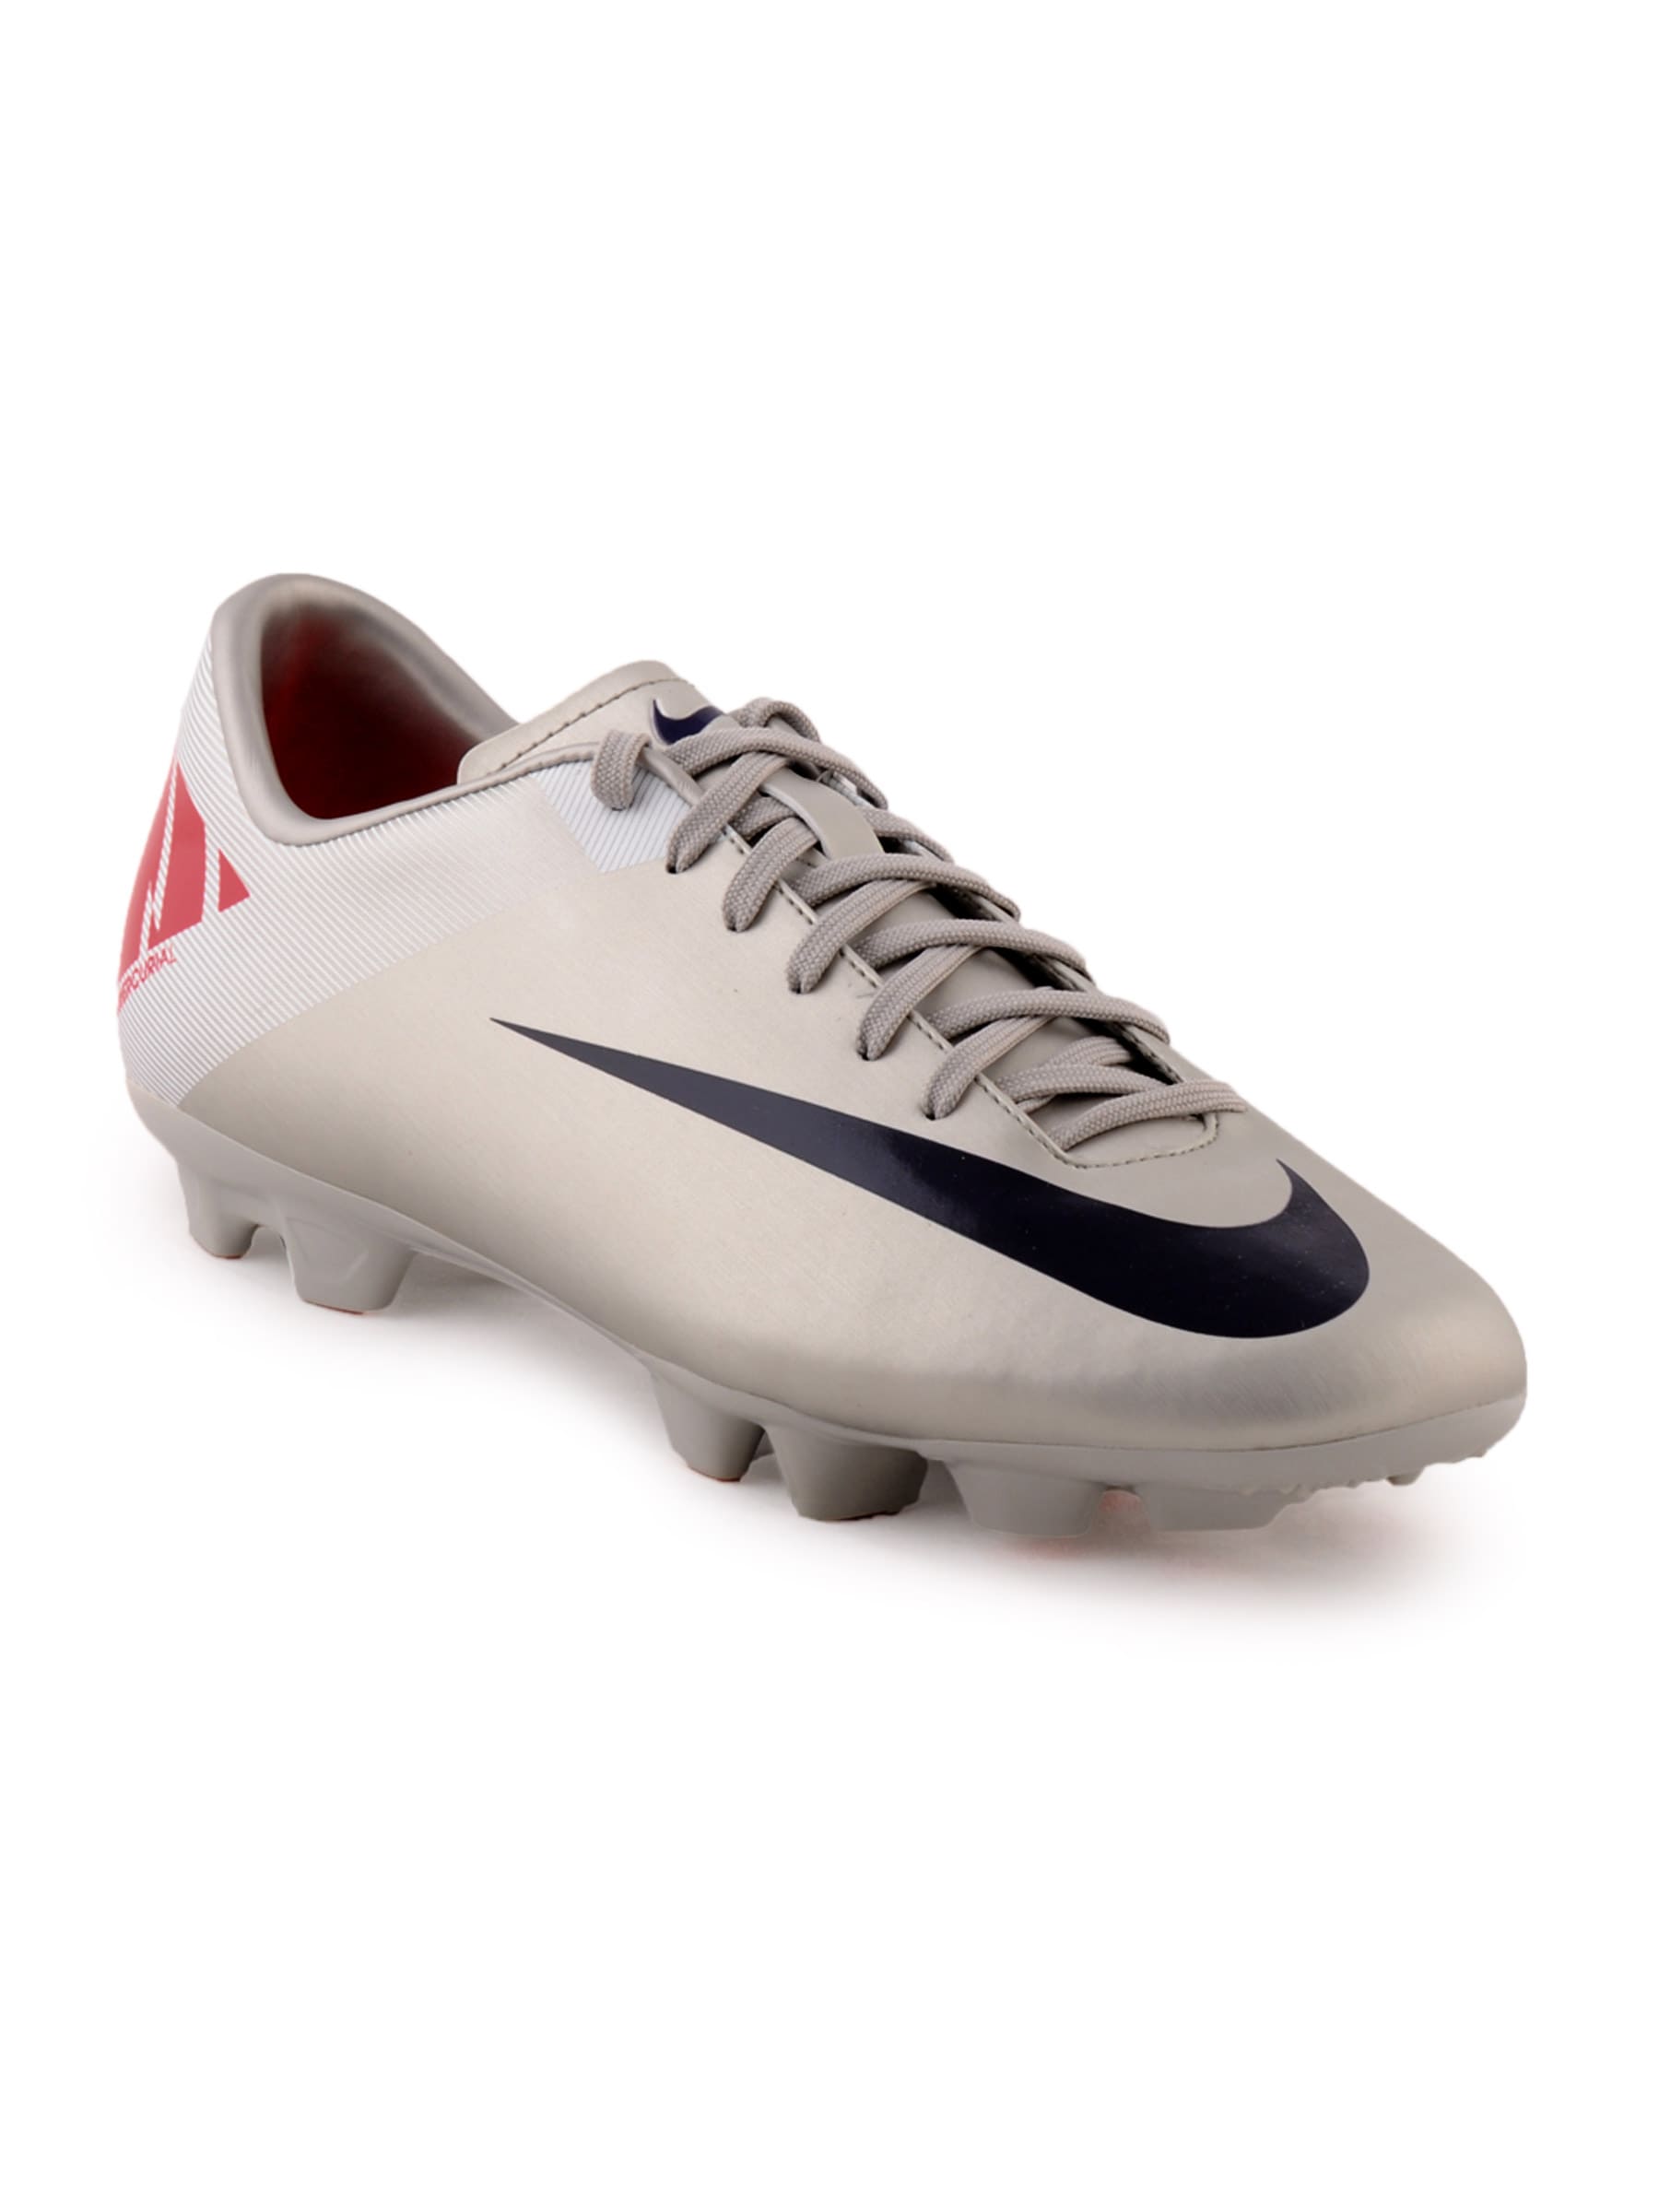 Nike Men Mercurial Victory Silver Sports Shoes